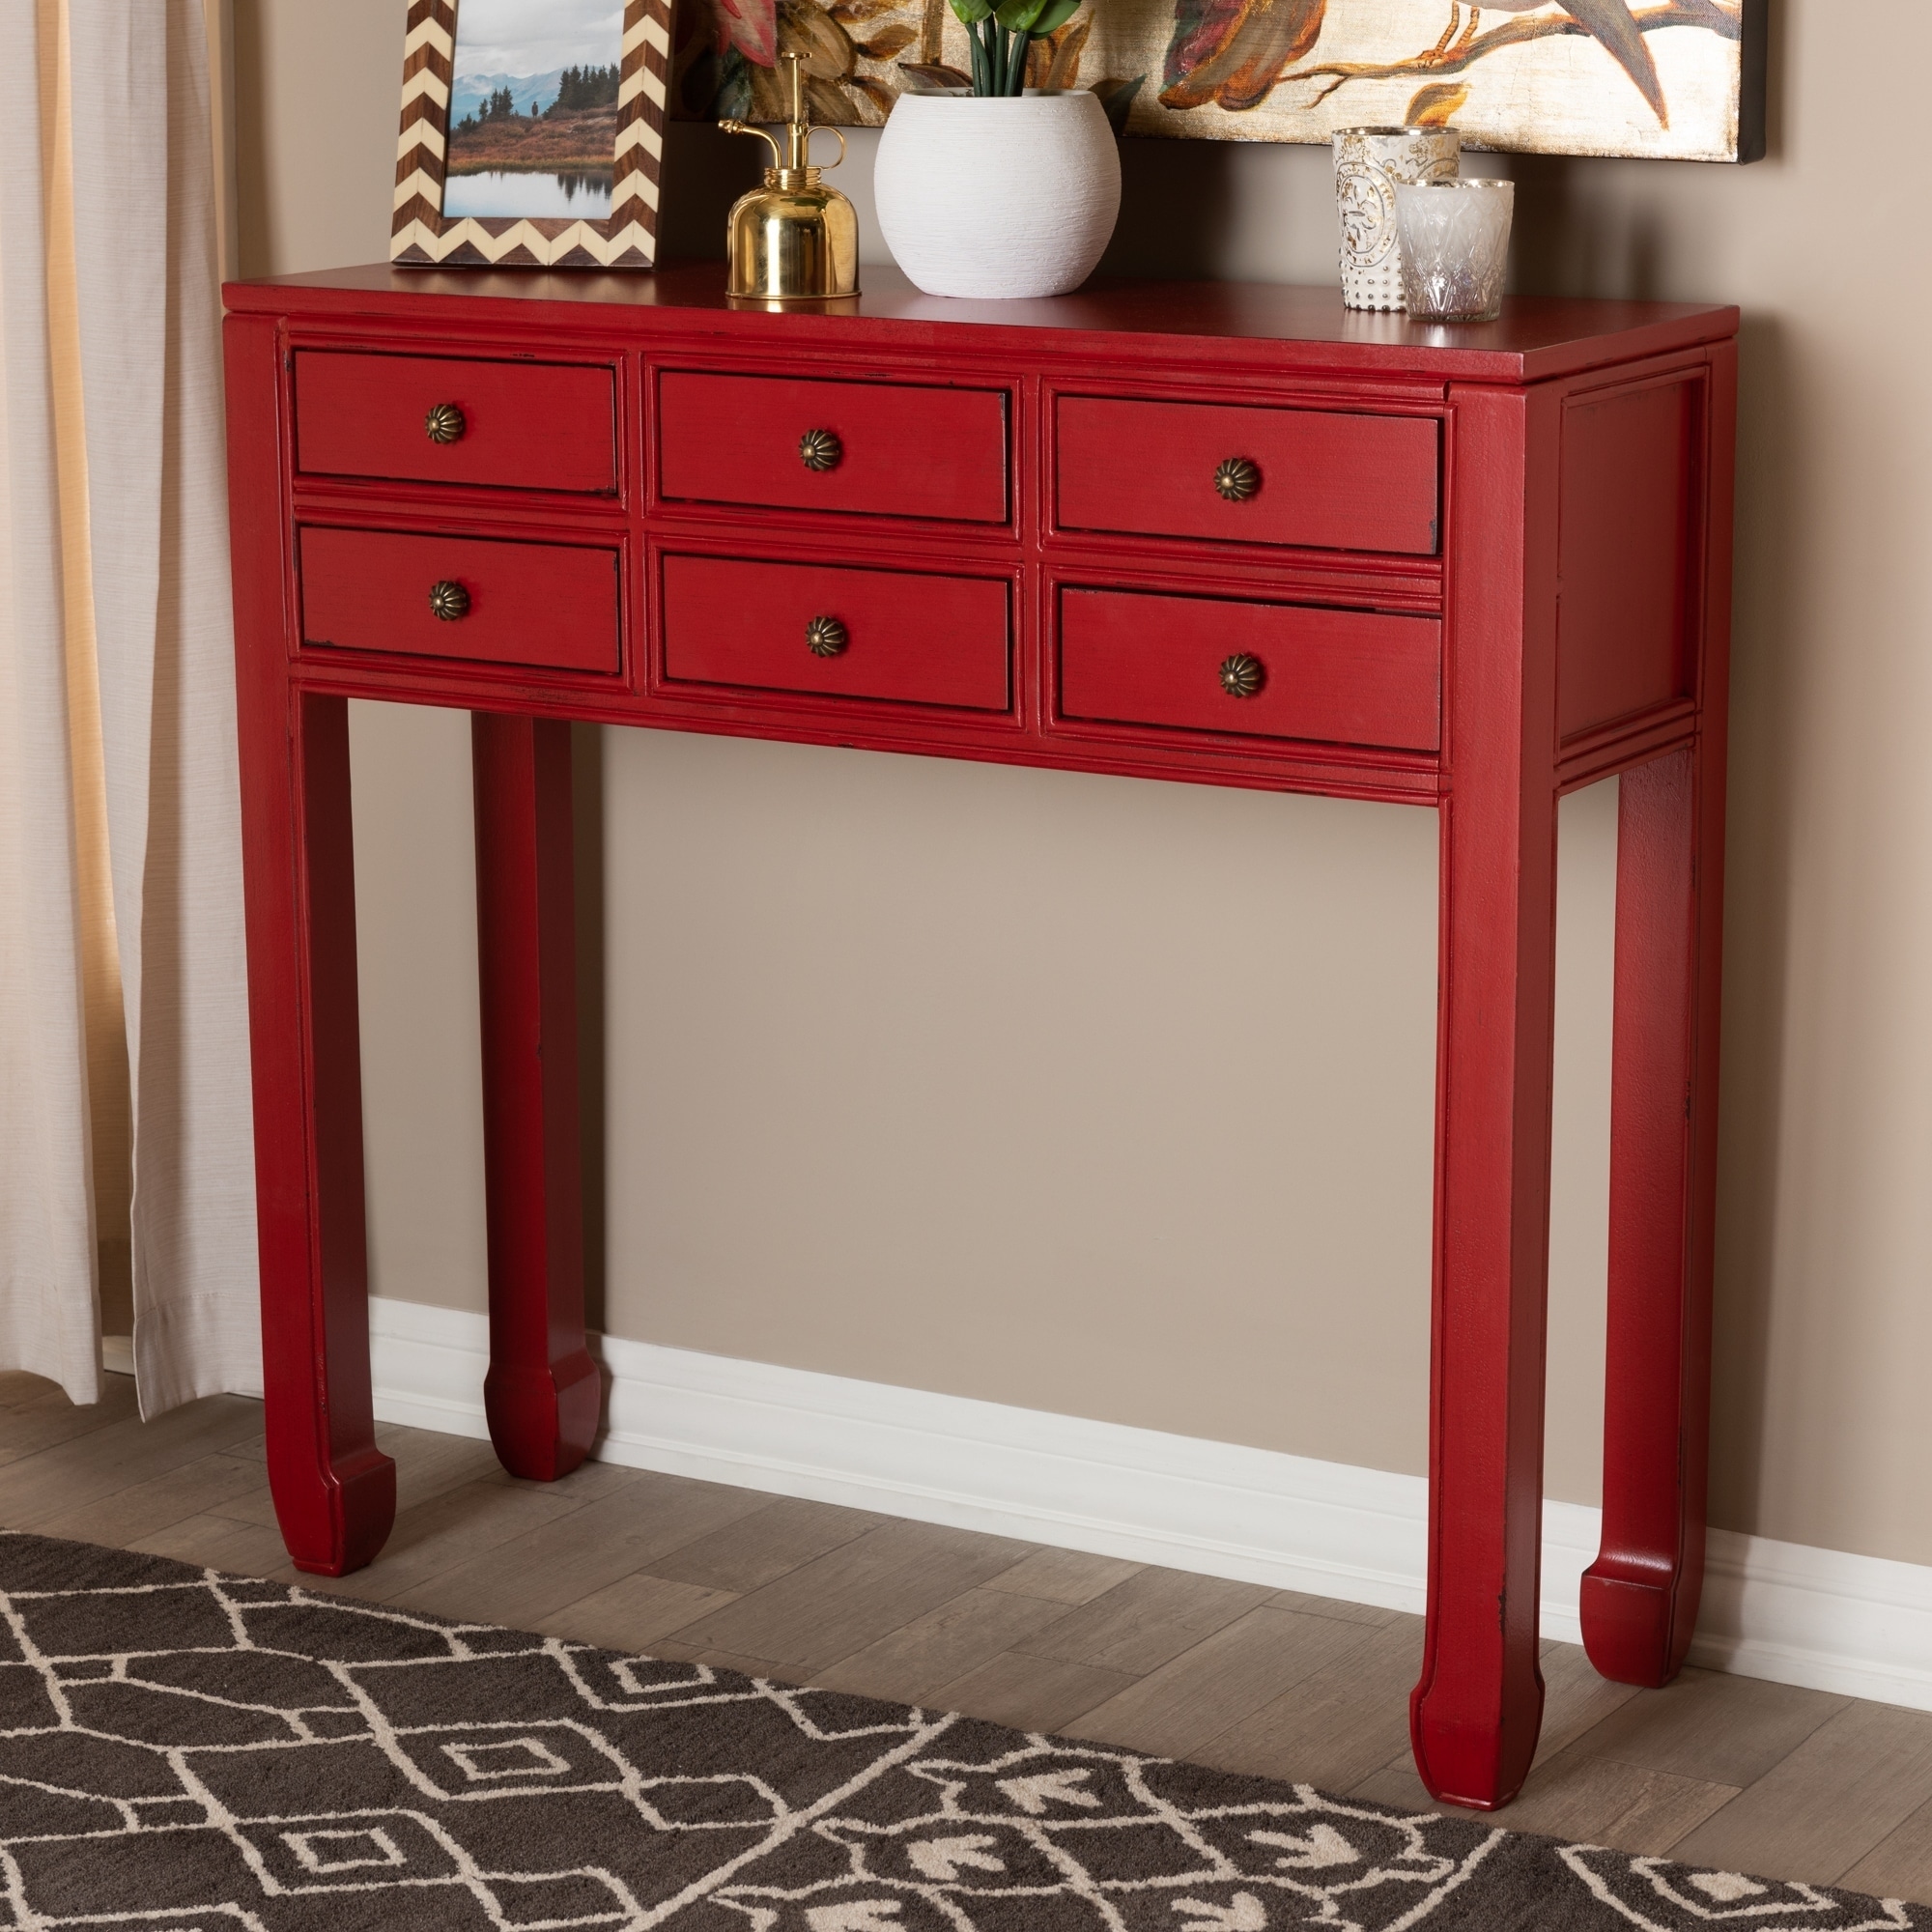 Shop Antique Red 6 Drawer Console Table By Baxton Studio On Sale